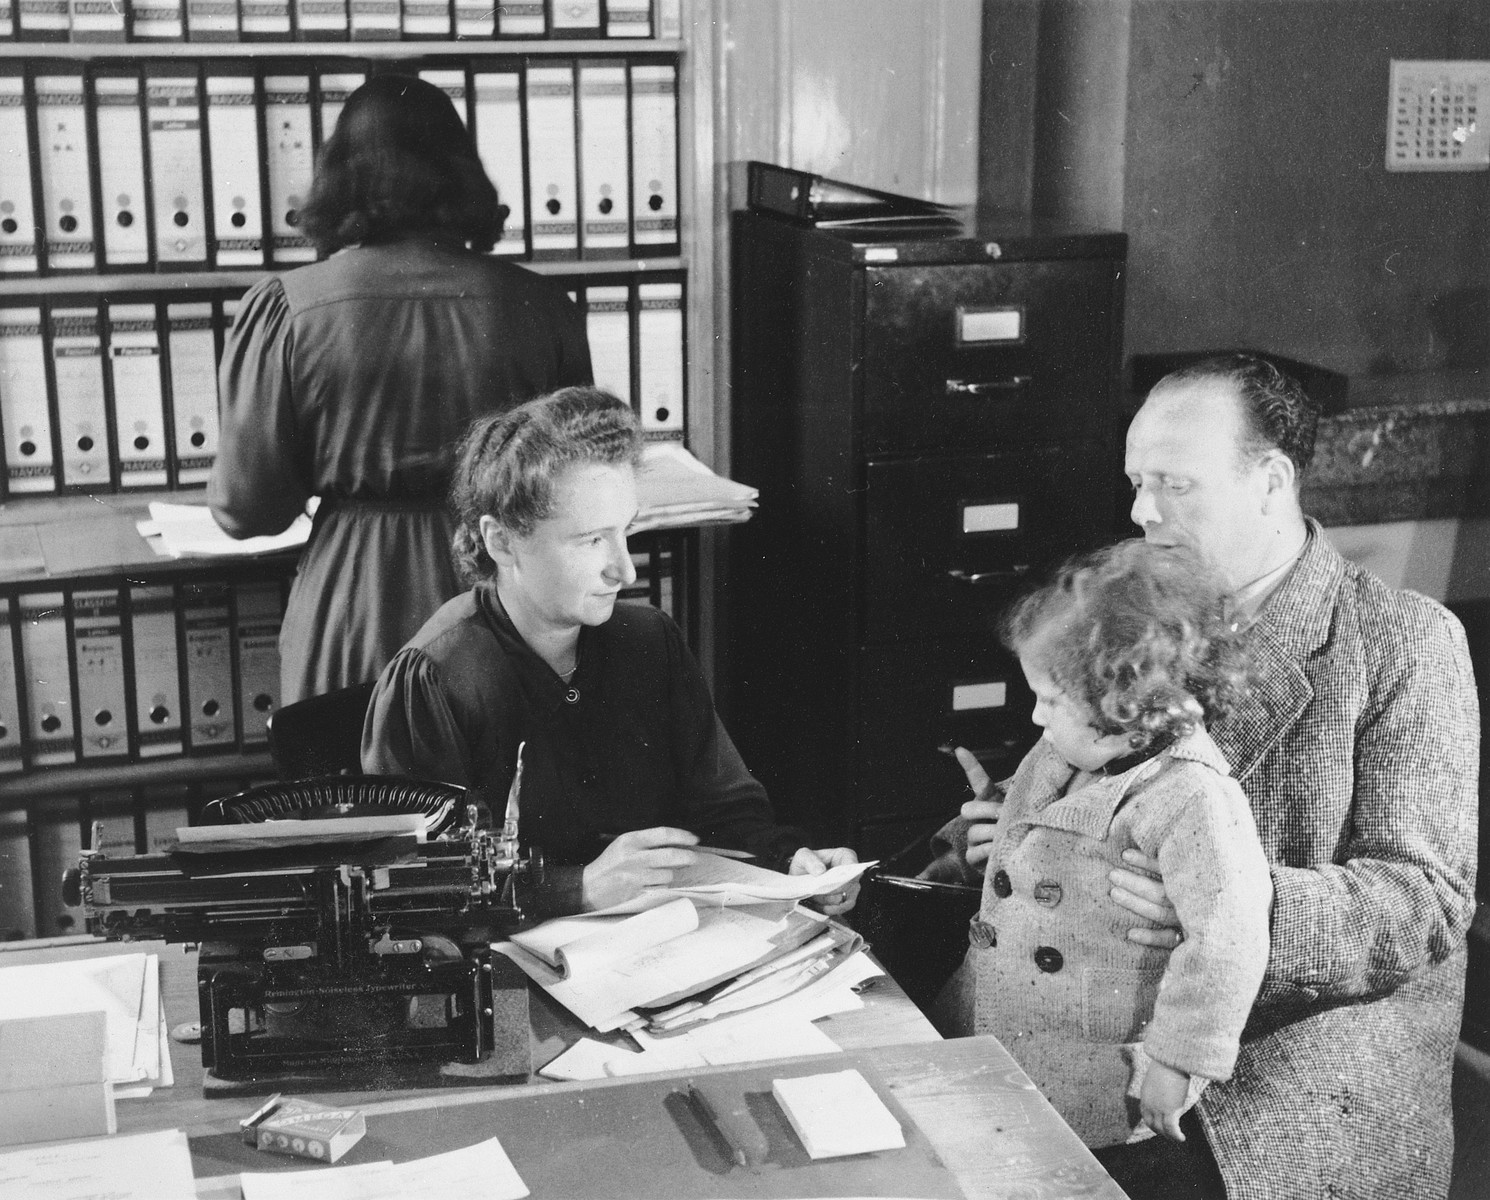 A woman, herself a refugee from France, assists a gentleman with a young child on his lap, in the offices of Secours aux Refugies in Geneva, Switzerland.

Seated at the desk is Ines Limot.